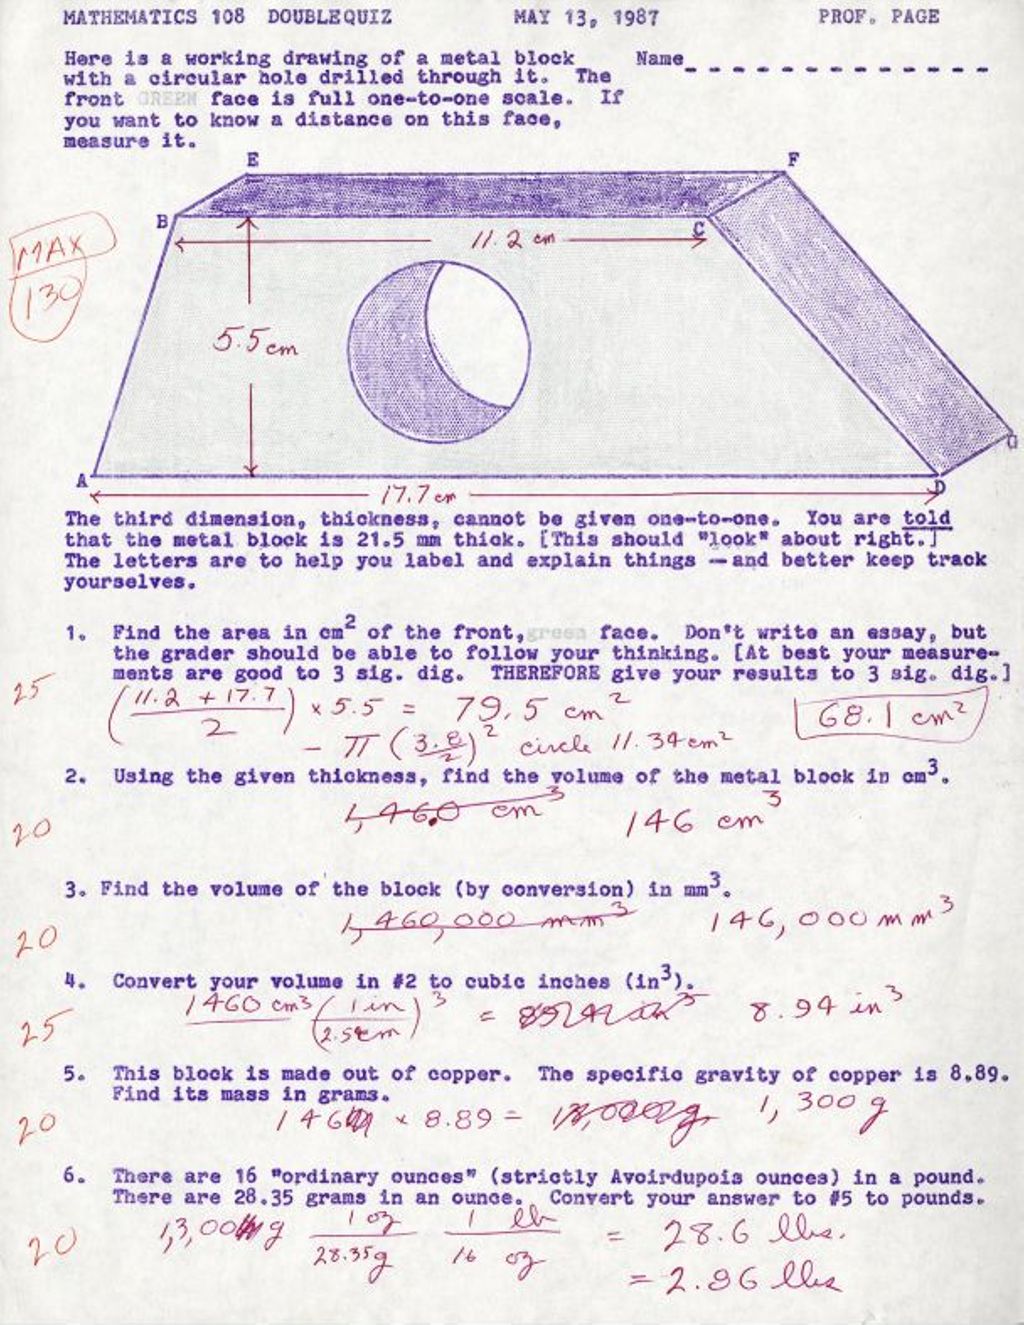 Miniature of Math 108 Double Quiz (1987) Here is a working drawing of a metal block w/ Answer Key